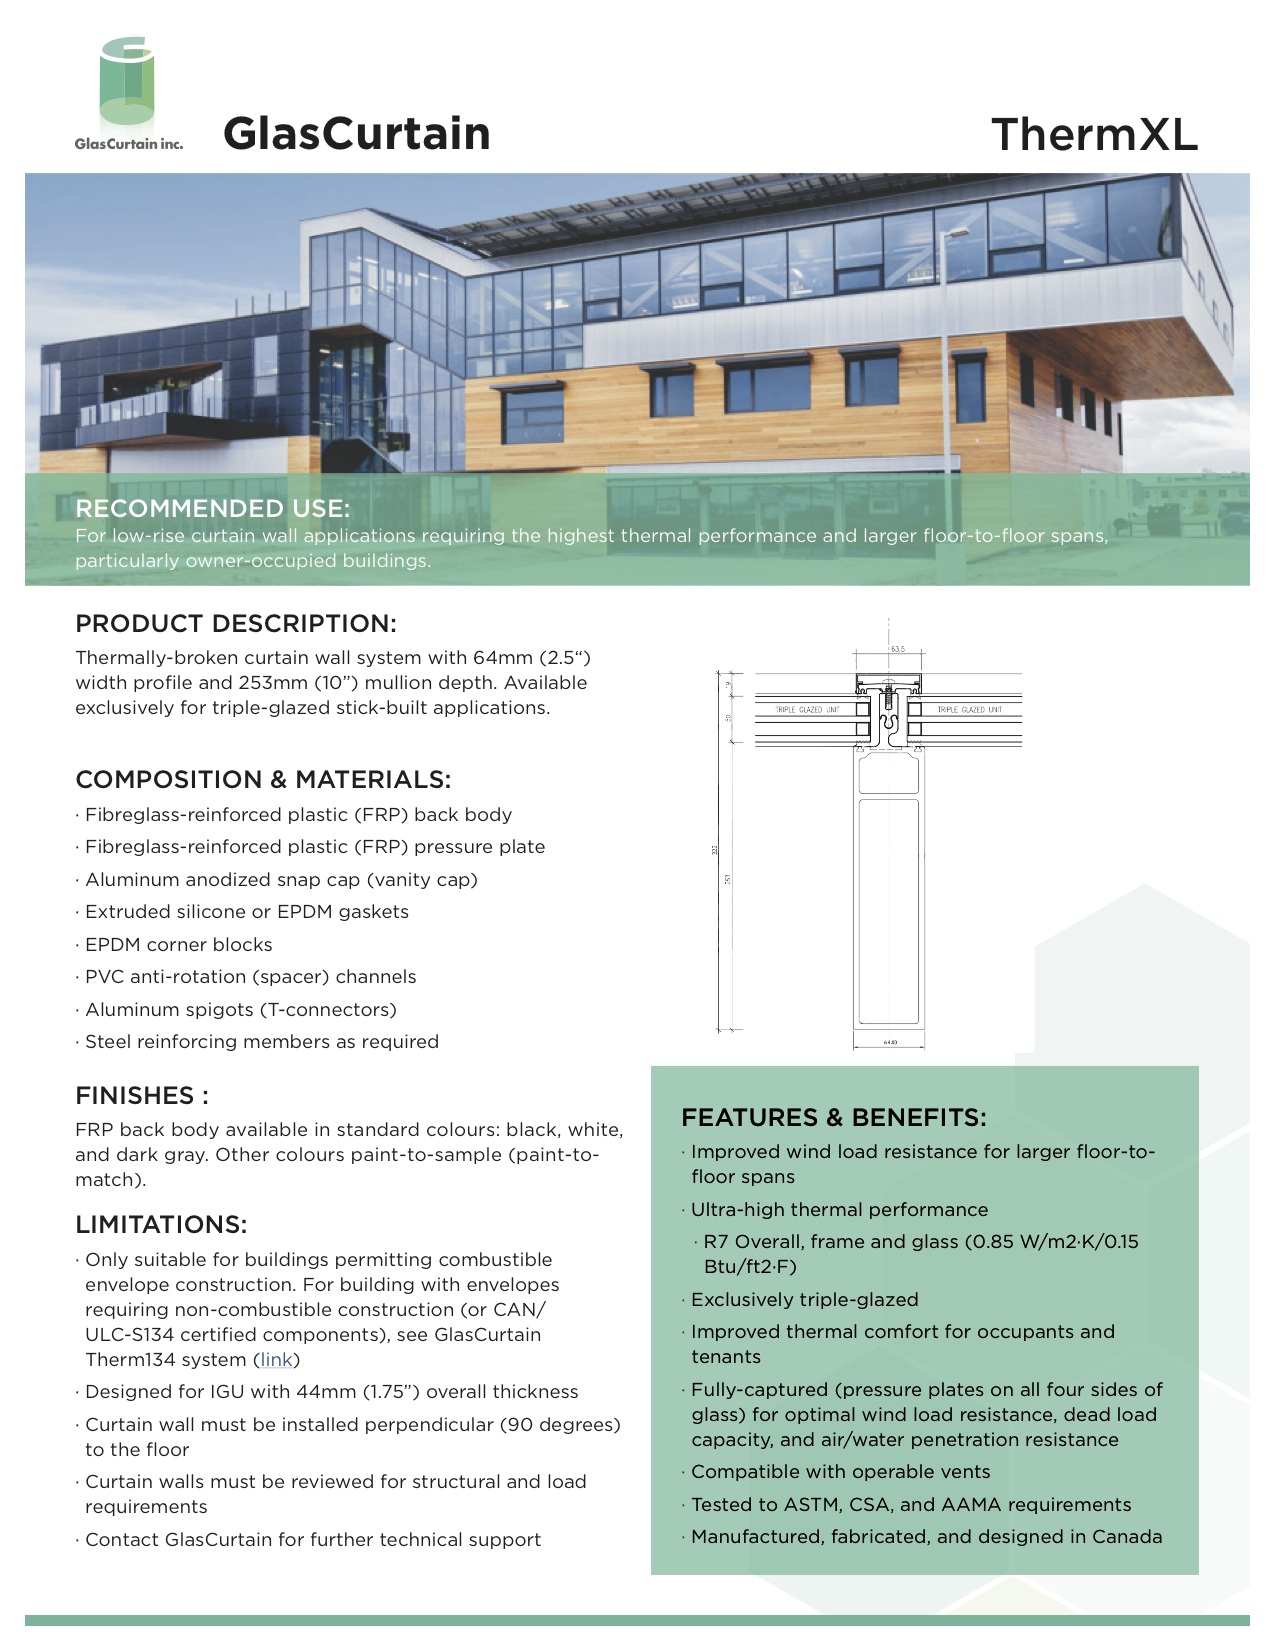 GlasCurtain ThermXL curtain wall product sheet